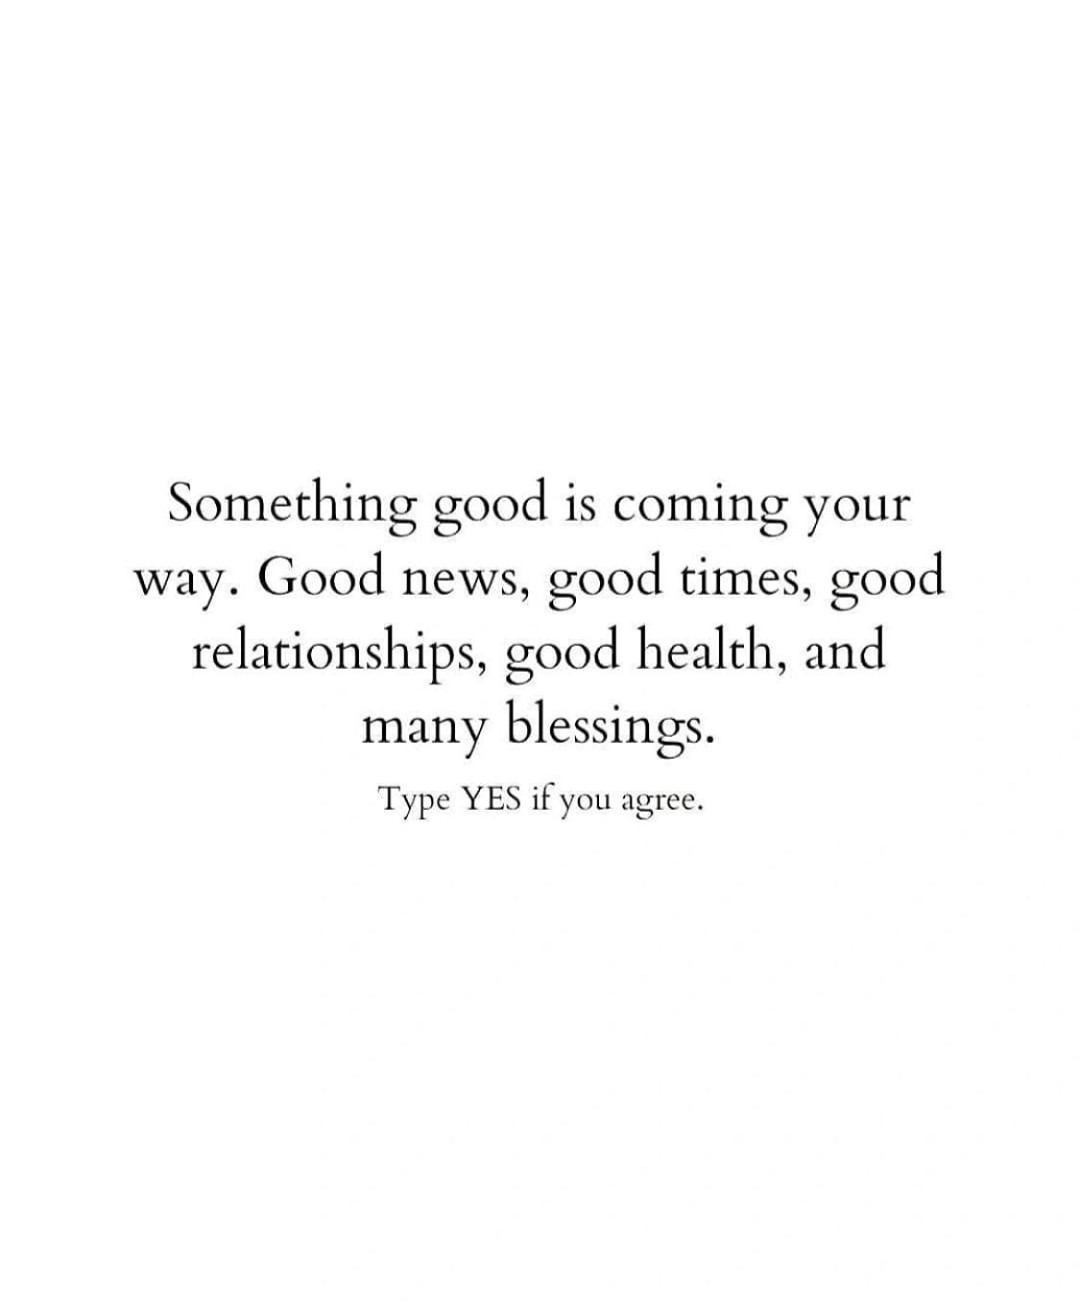 Something good is coming your way. Good news, good times, good relationships, good health, and many blessings. Type yes if you agree.